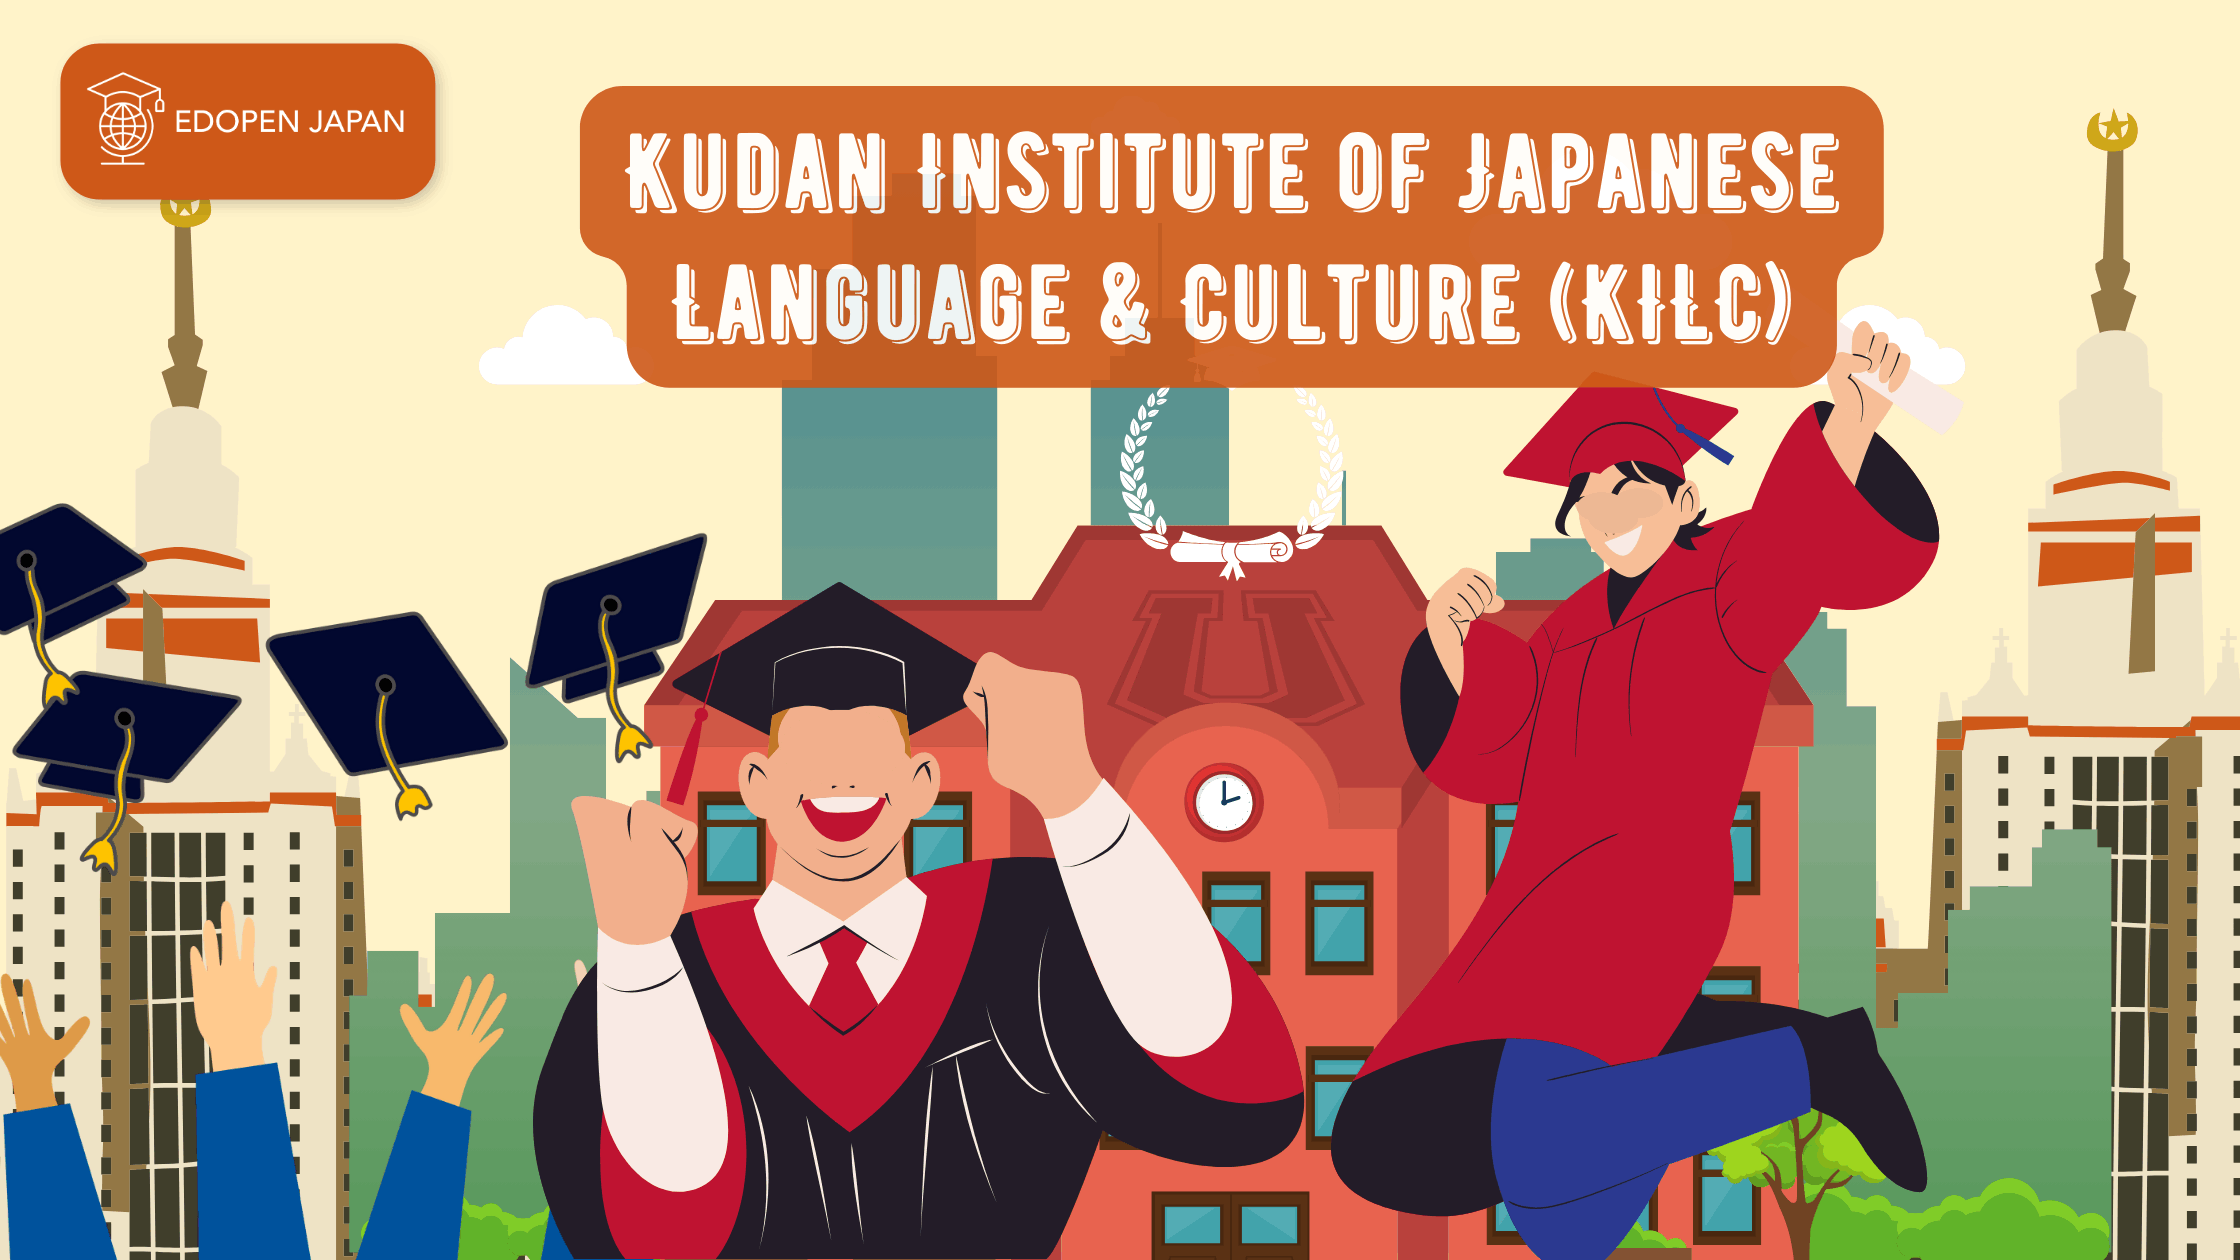 Kudan Institute of Japanese Language & Culture | A-Z Important Features You Need to Know - EDOPEN Japan